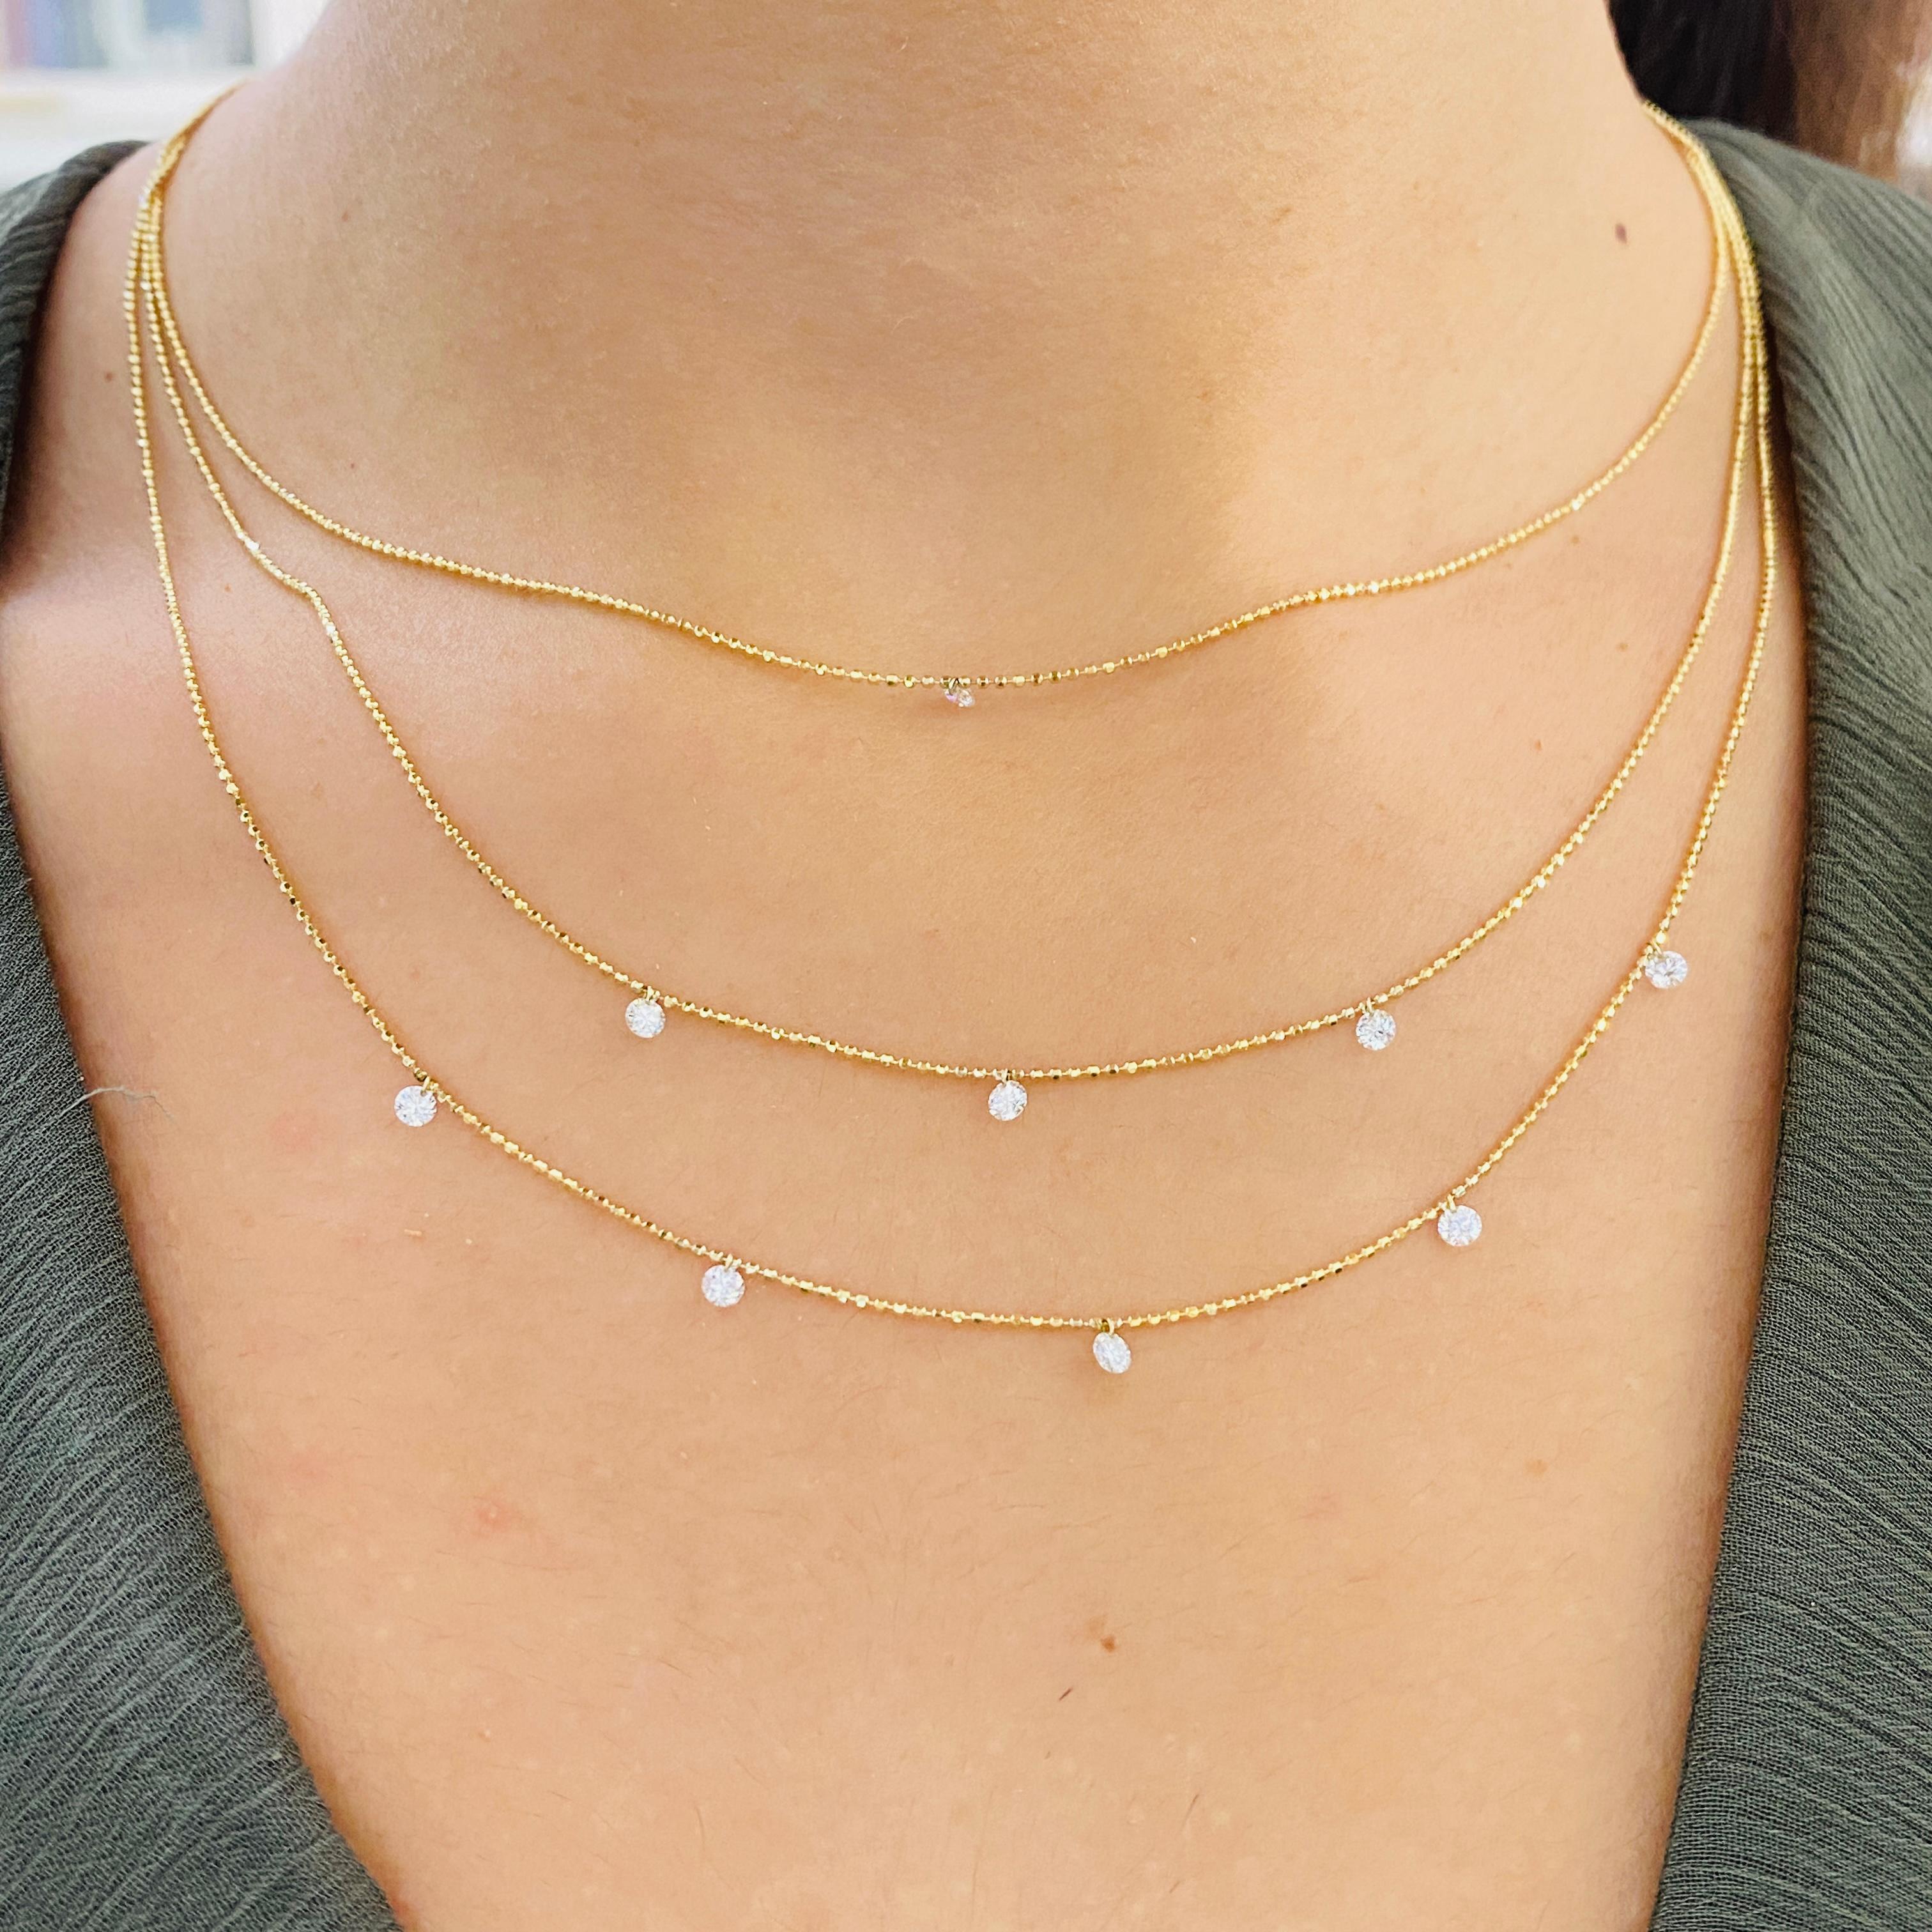 This fabulous diamond necklace has three layers all connected to our amazing clasp organizer. And the clasp can be used for any three necklaces! The shortest necklace is 16 inches long with one dashing diamond, the second necklace is 18 inches long